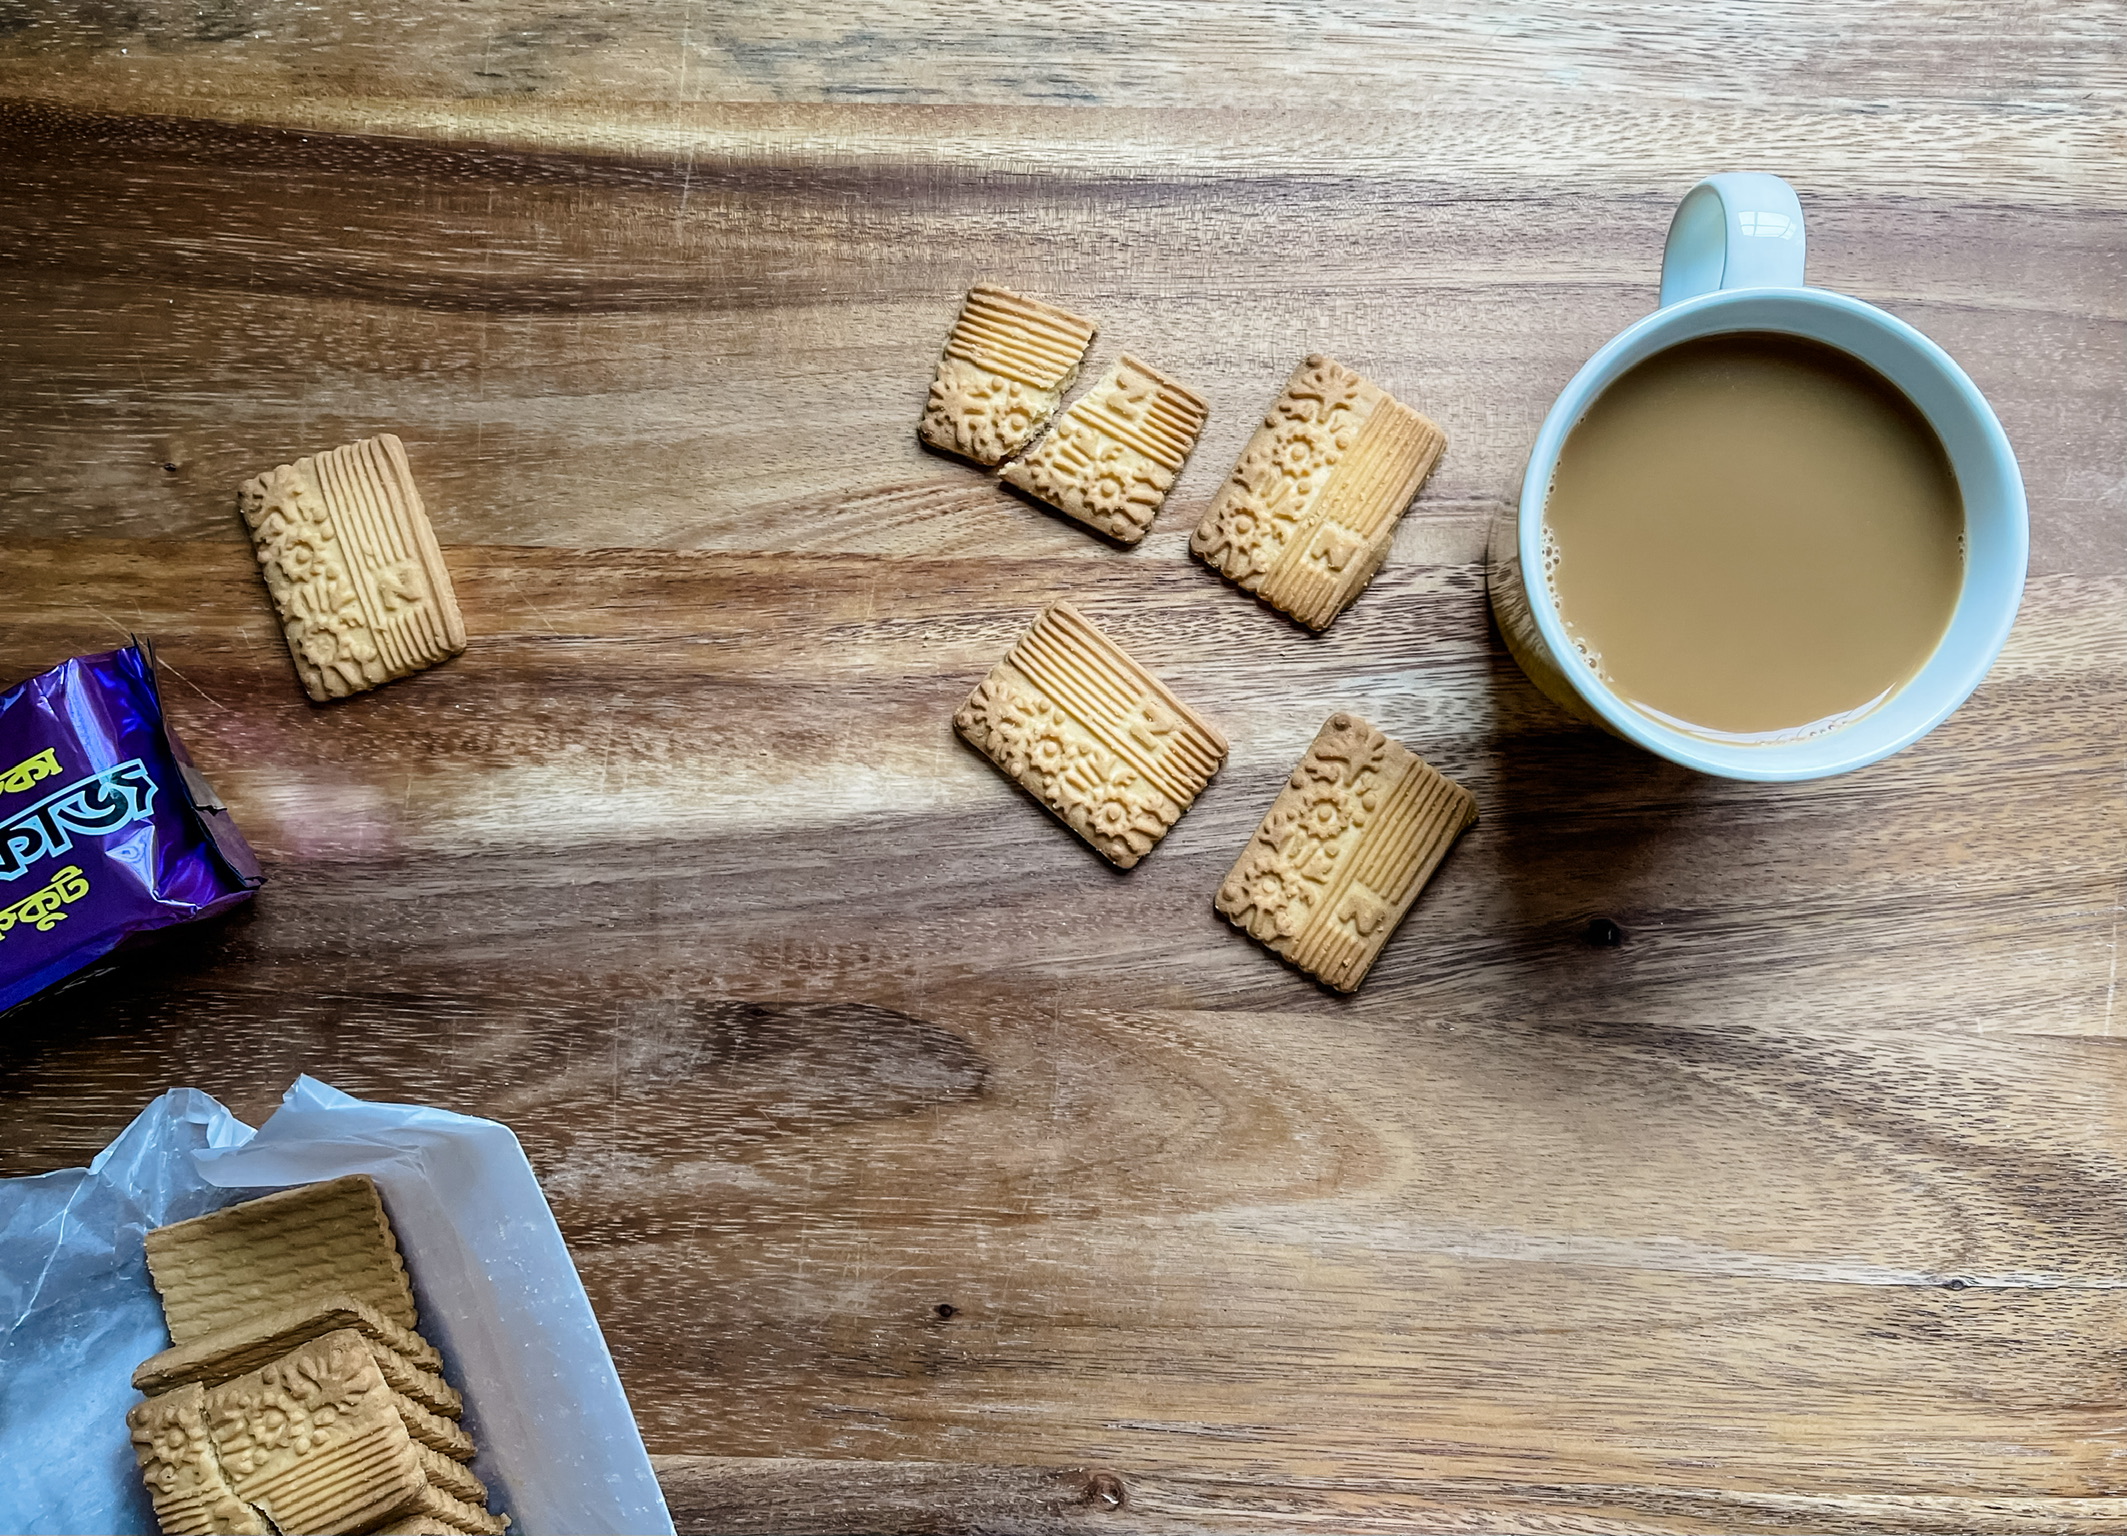 Nabisco Glucose Biscuits on a wooden table with a cup of tea